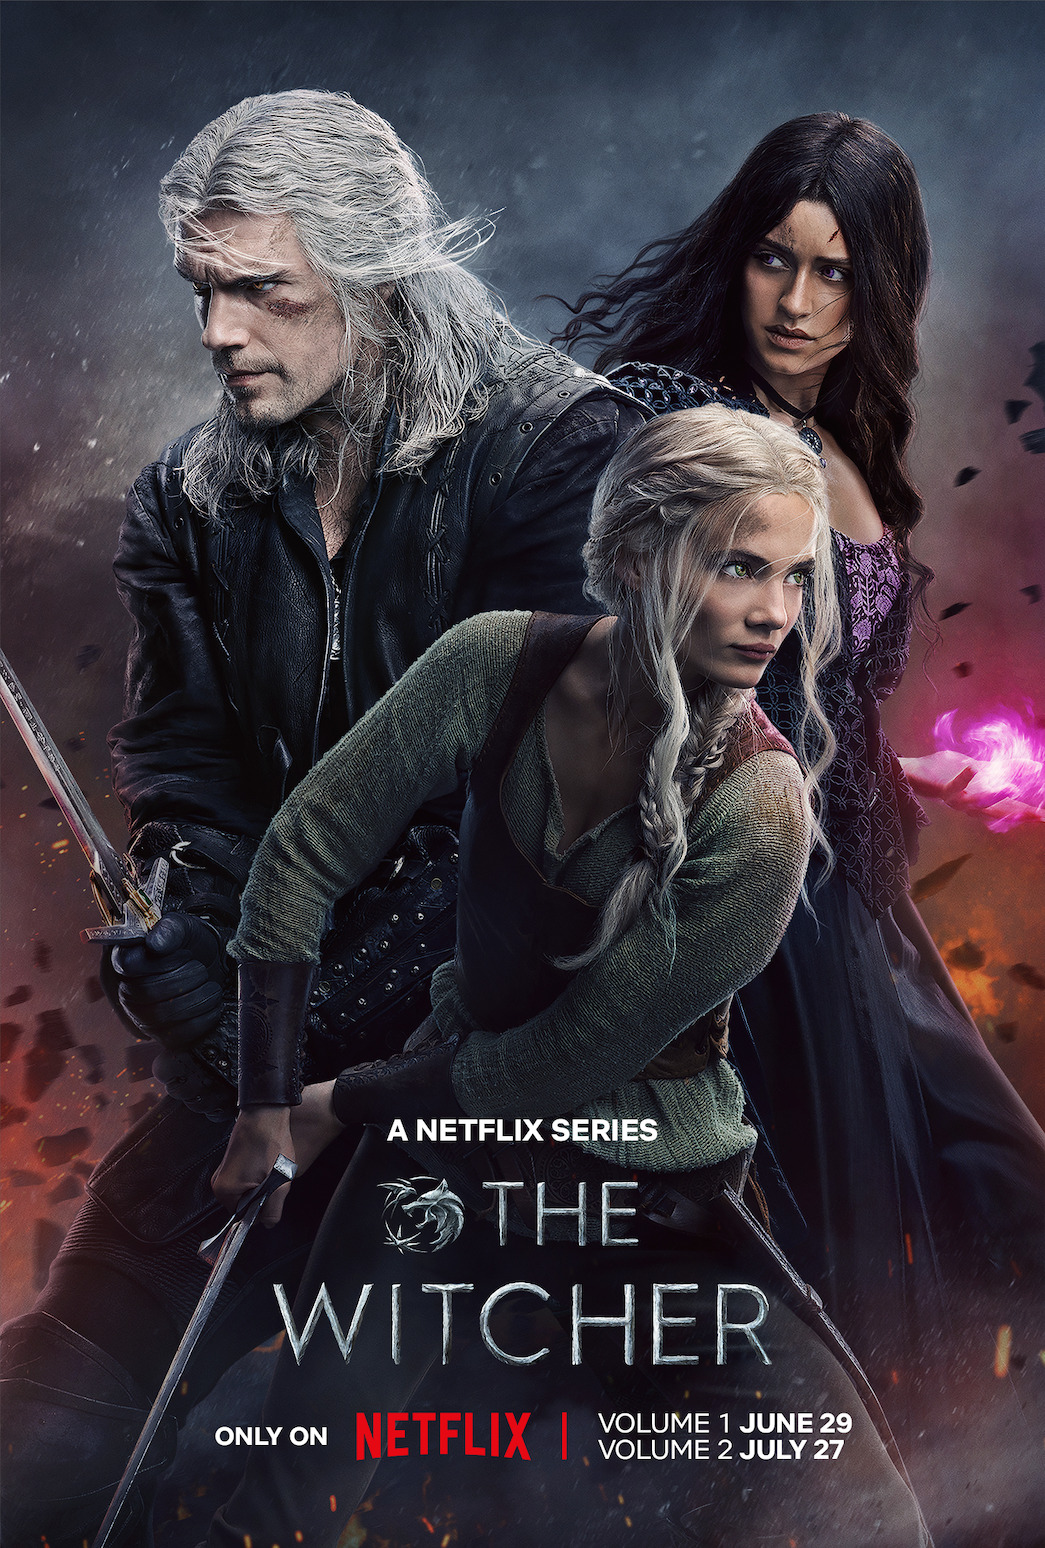 The Witcher Season 3 - second poster with release dates